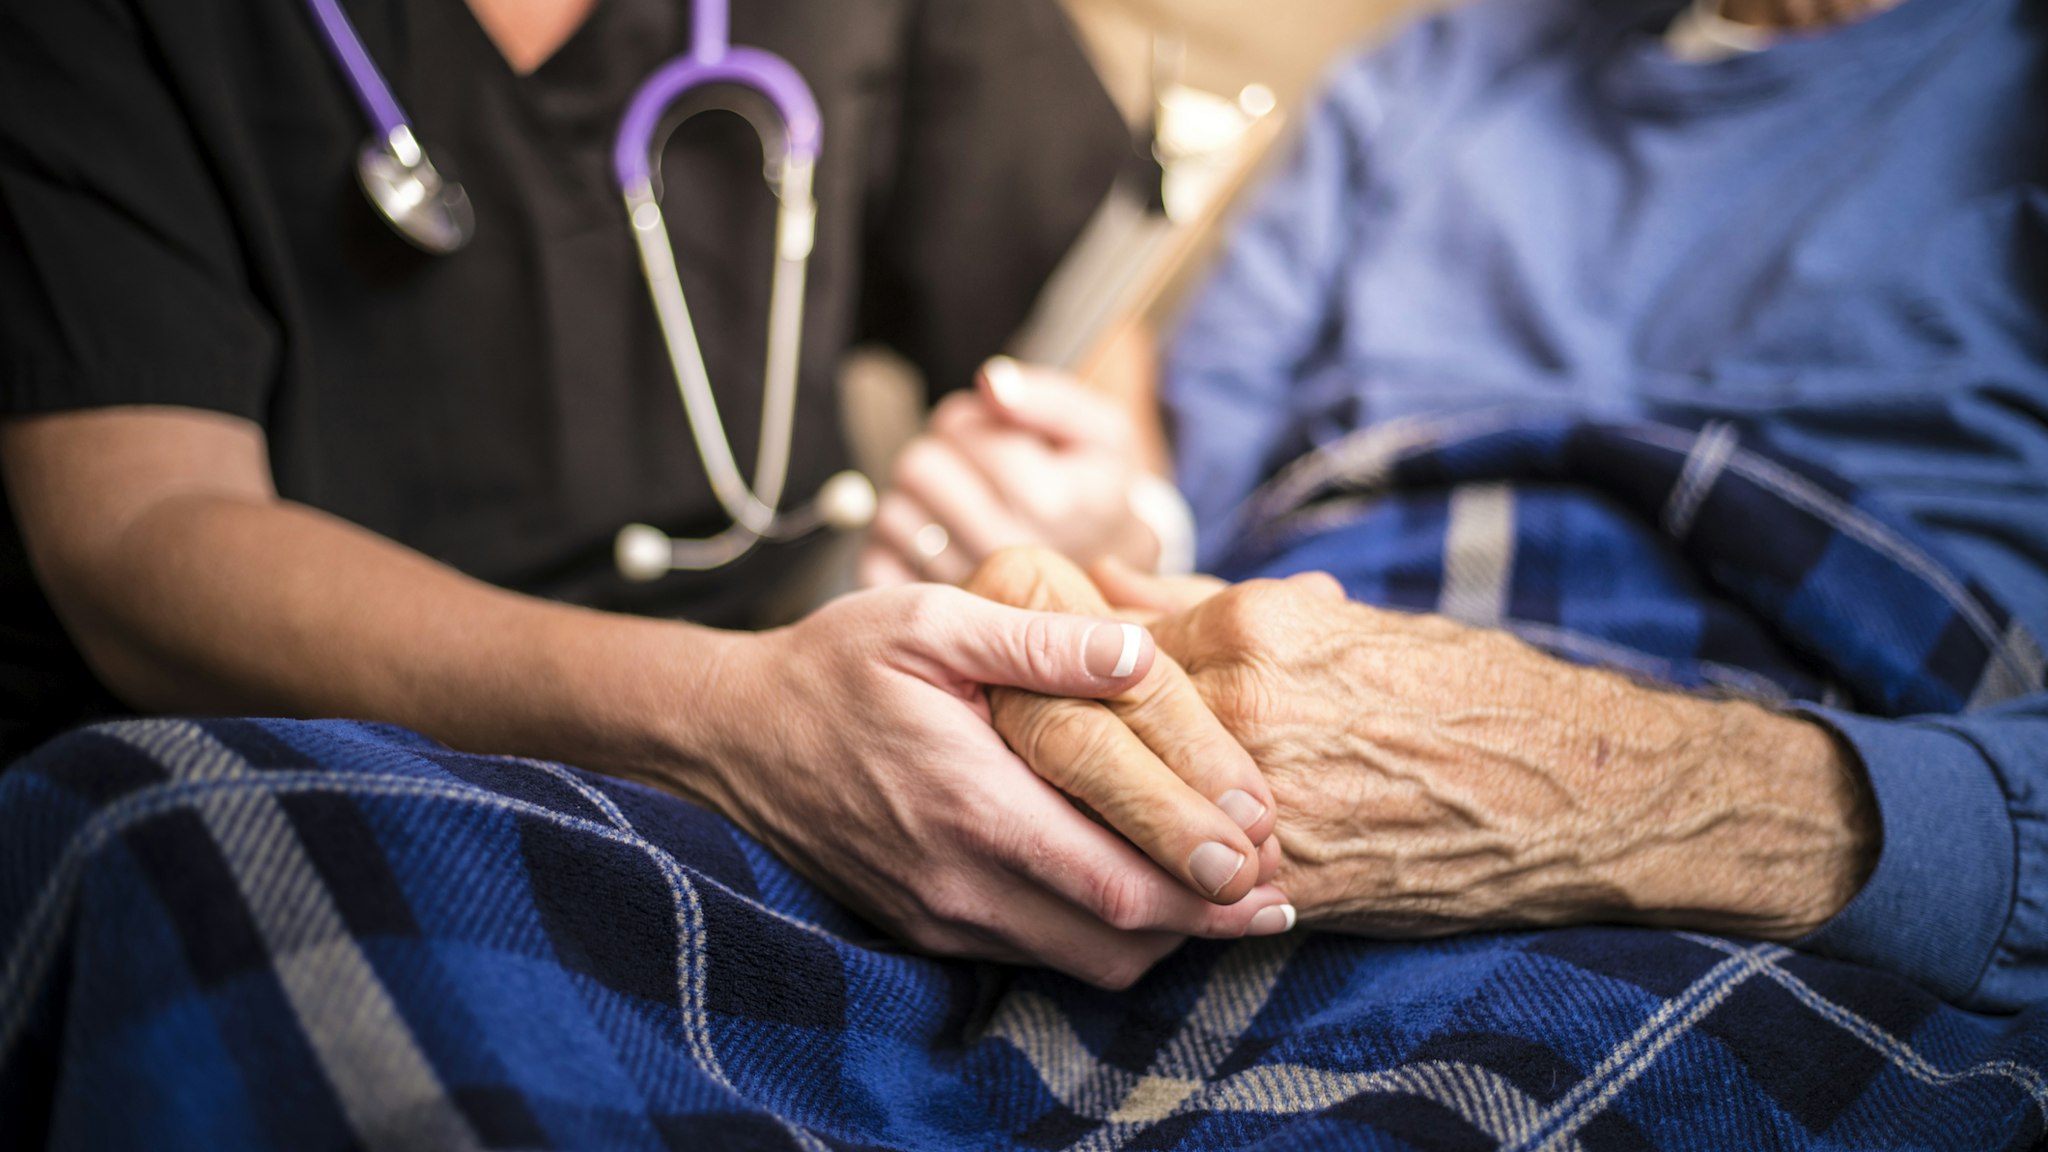 A stock photo of a Hospice Nurse visiting an Elderly male patient who is receiving hospice/palliative care.